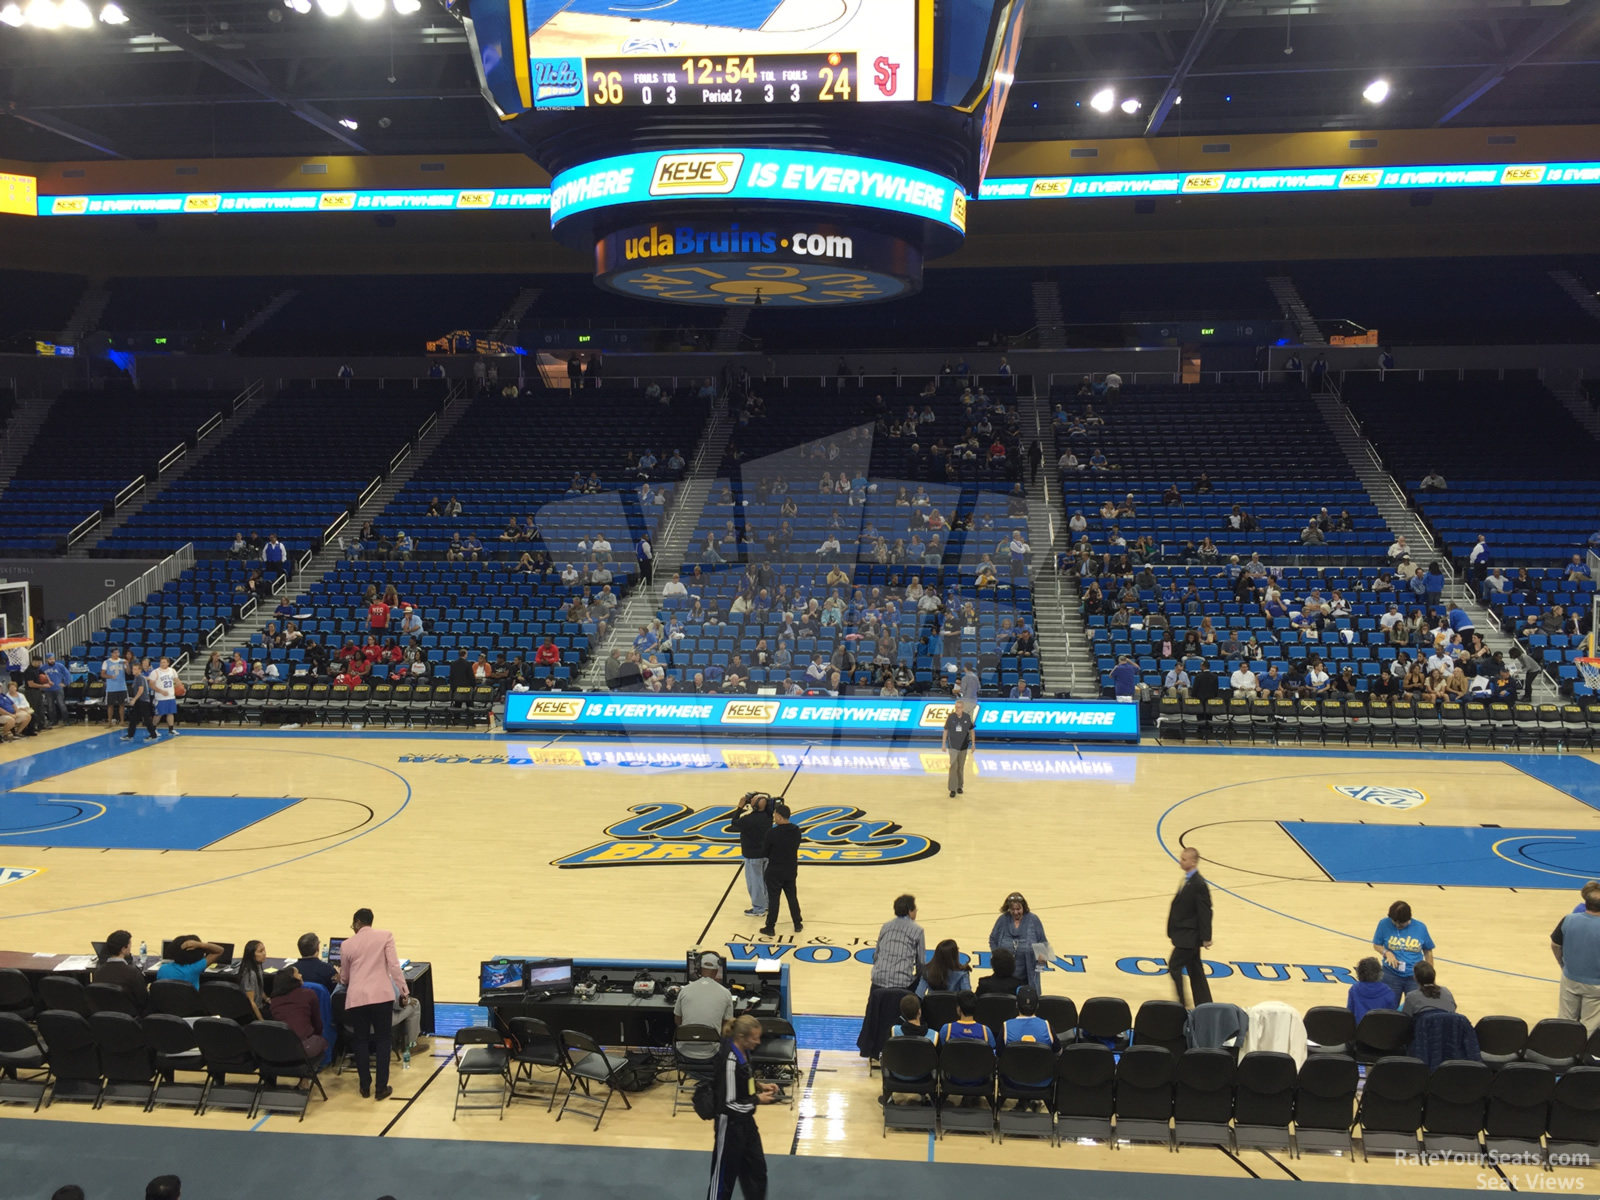 section 115, row 3 seat view  - pauley pavilion